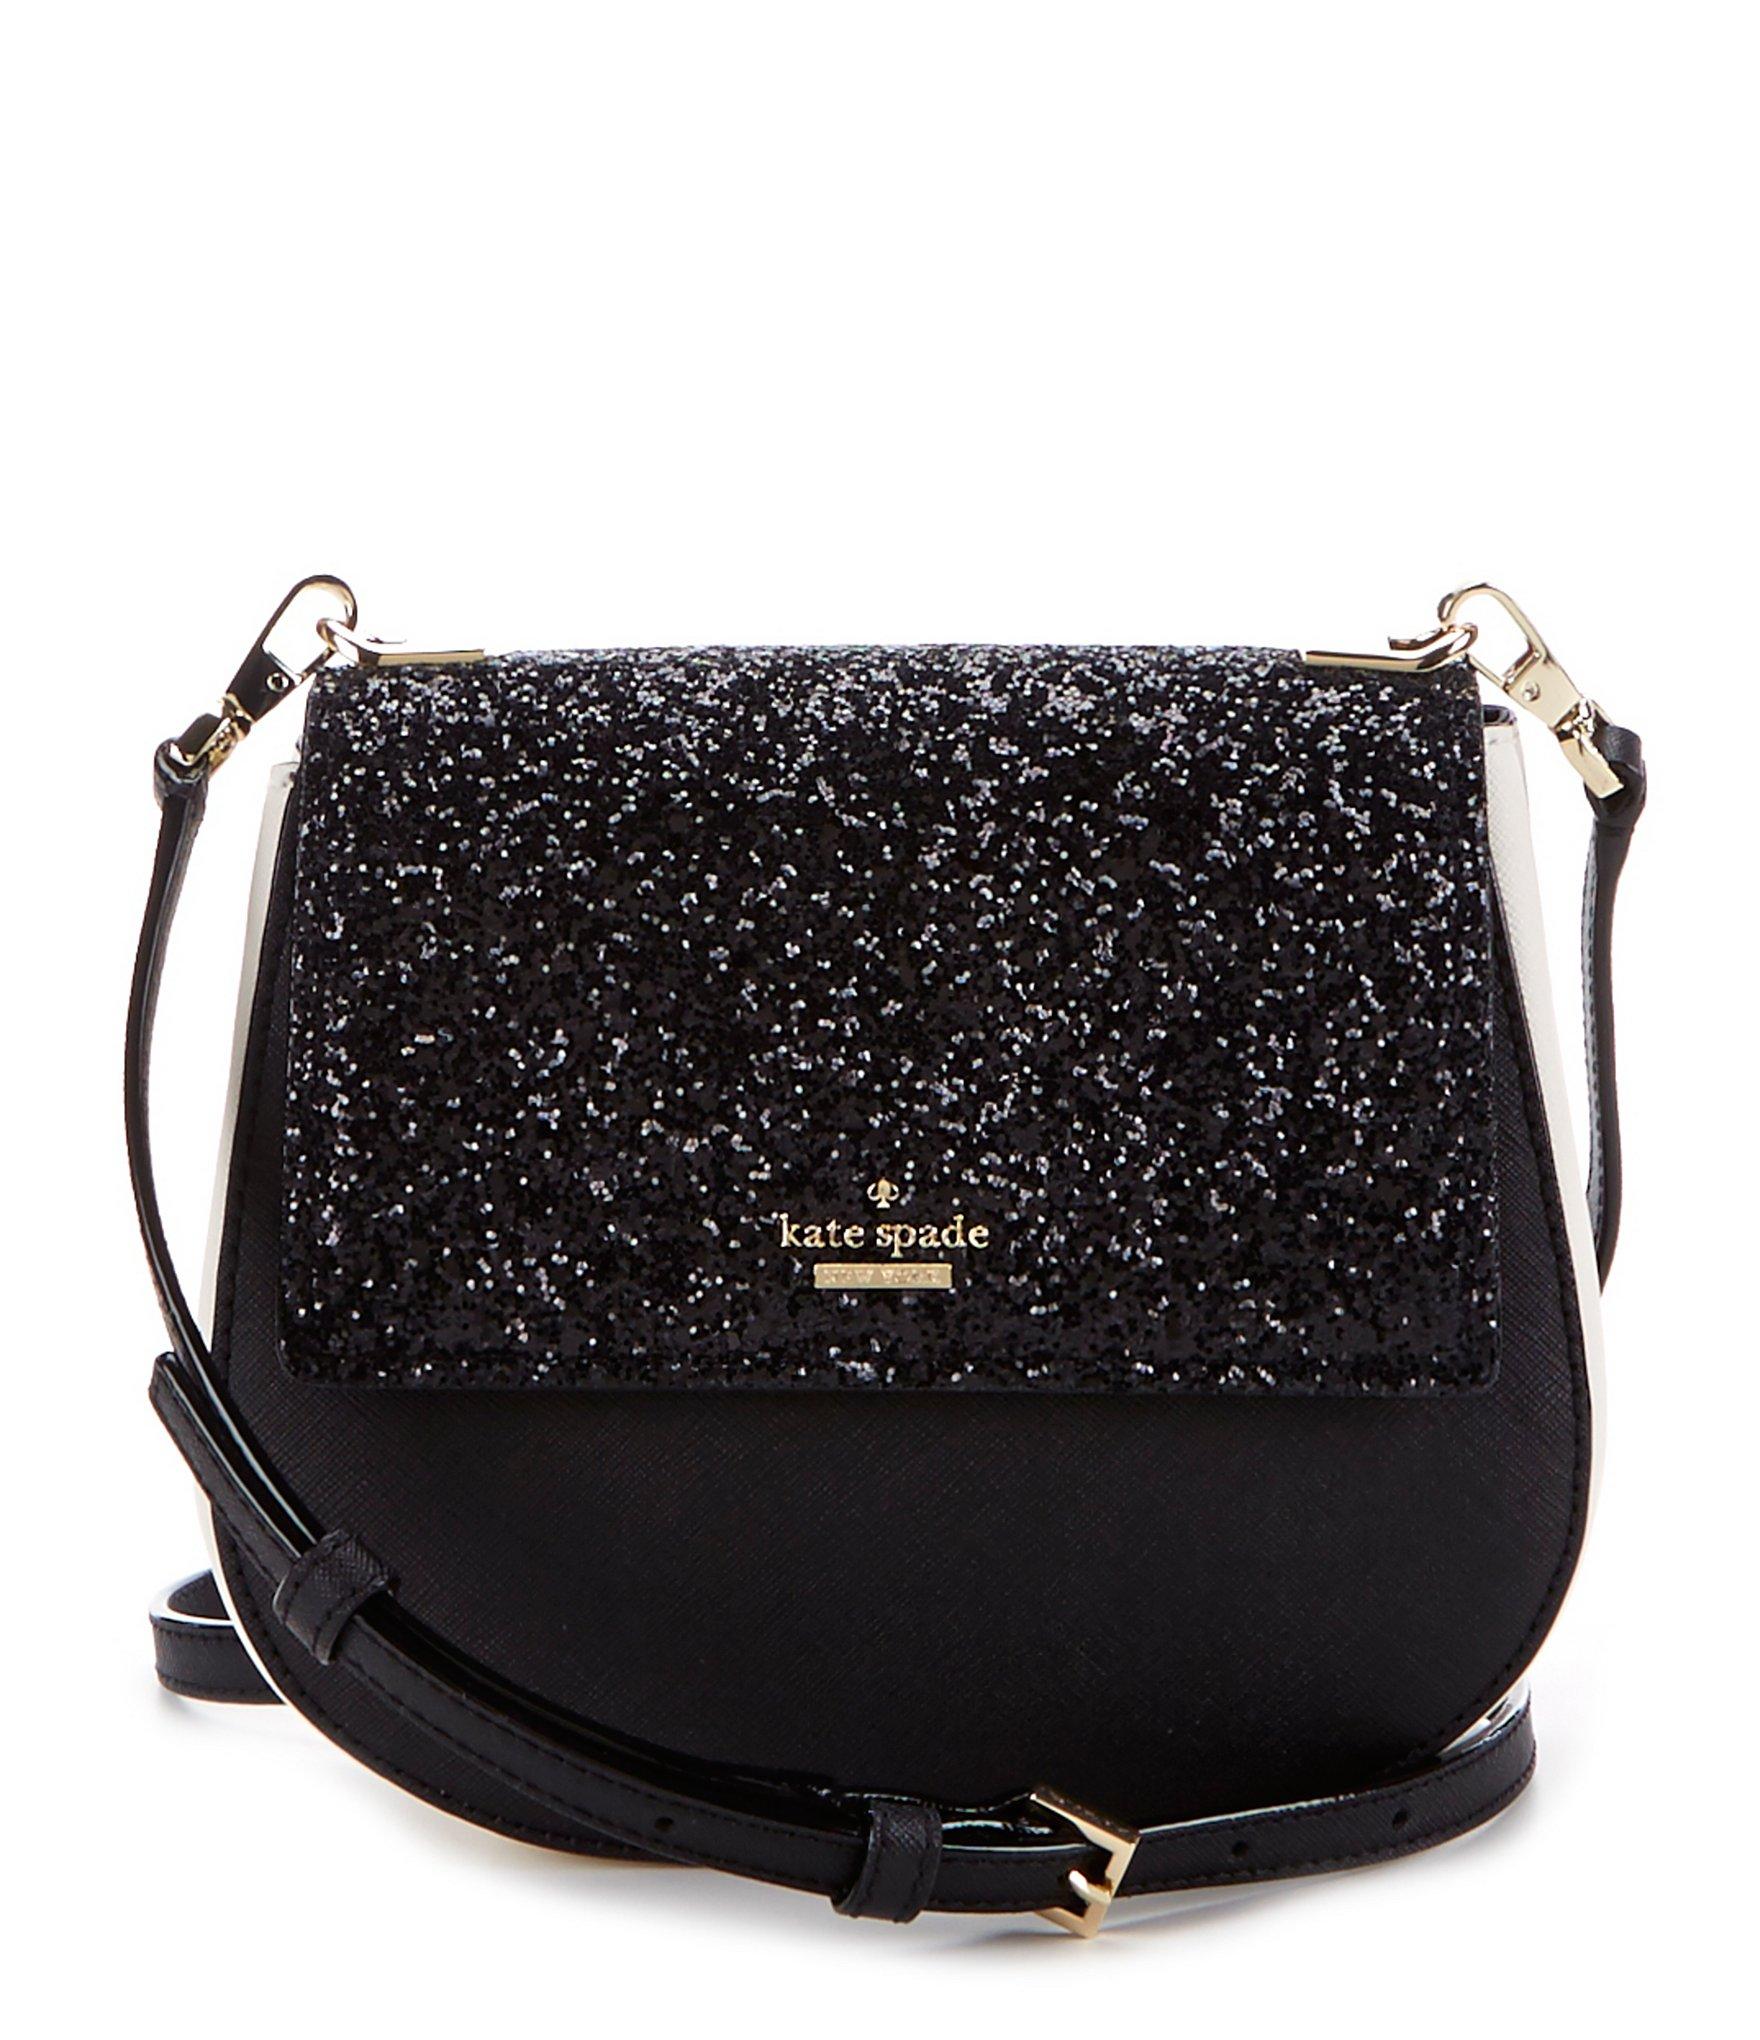 Lyst - Kate spade new york Cameron Street Collection Small Byrdie Glitter Cross-body Bag in Black